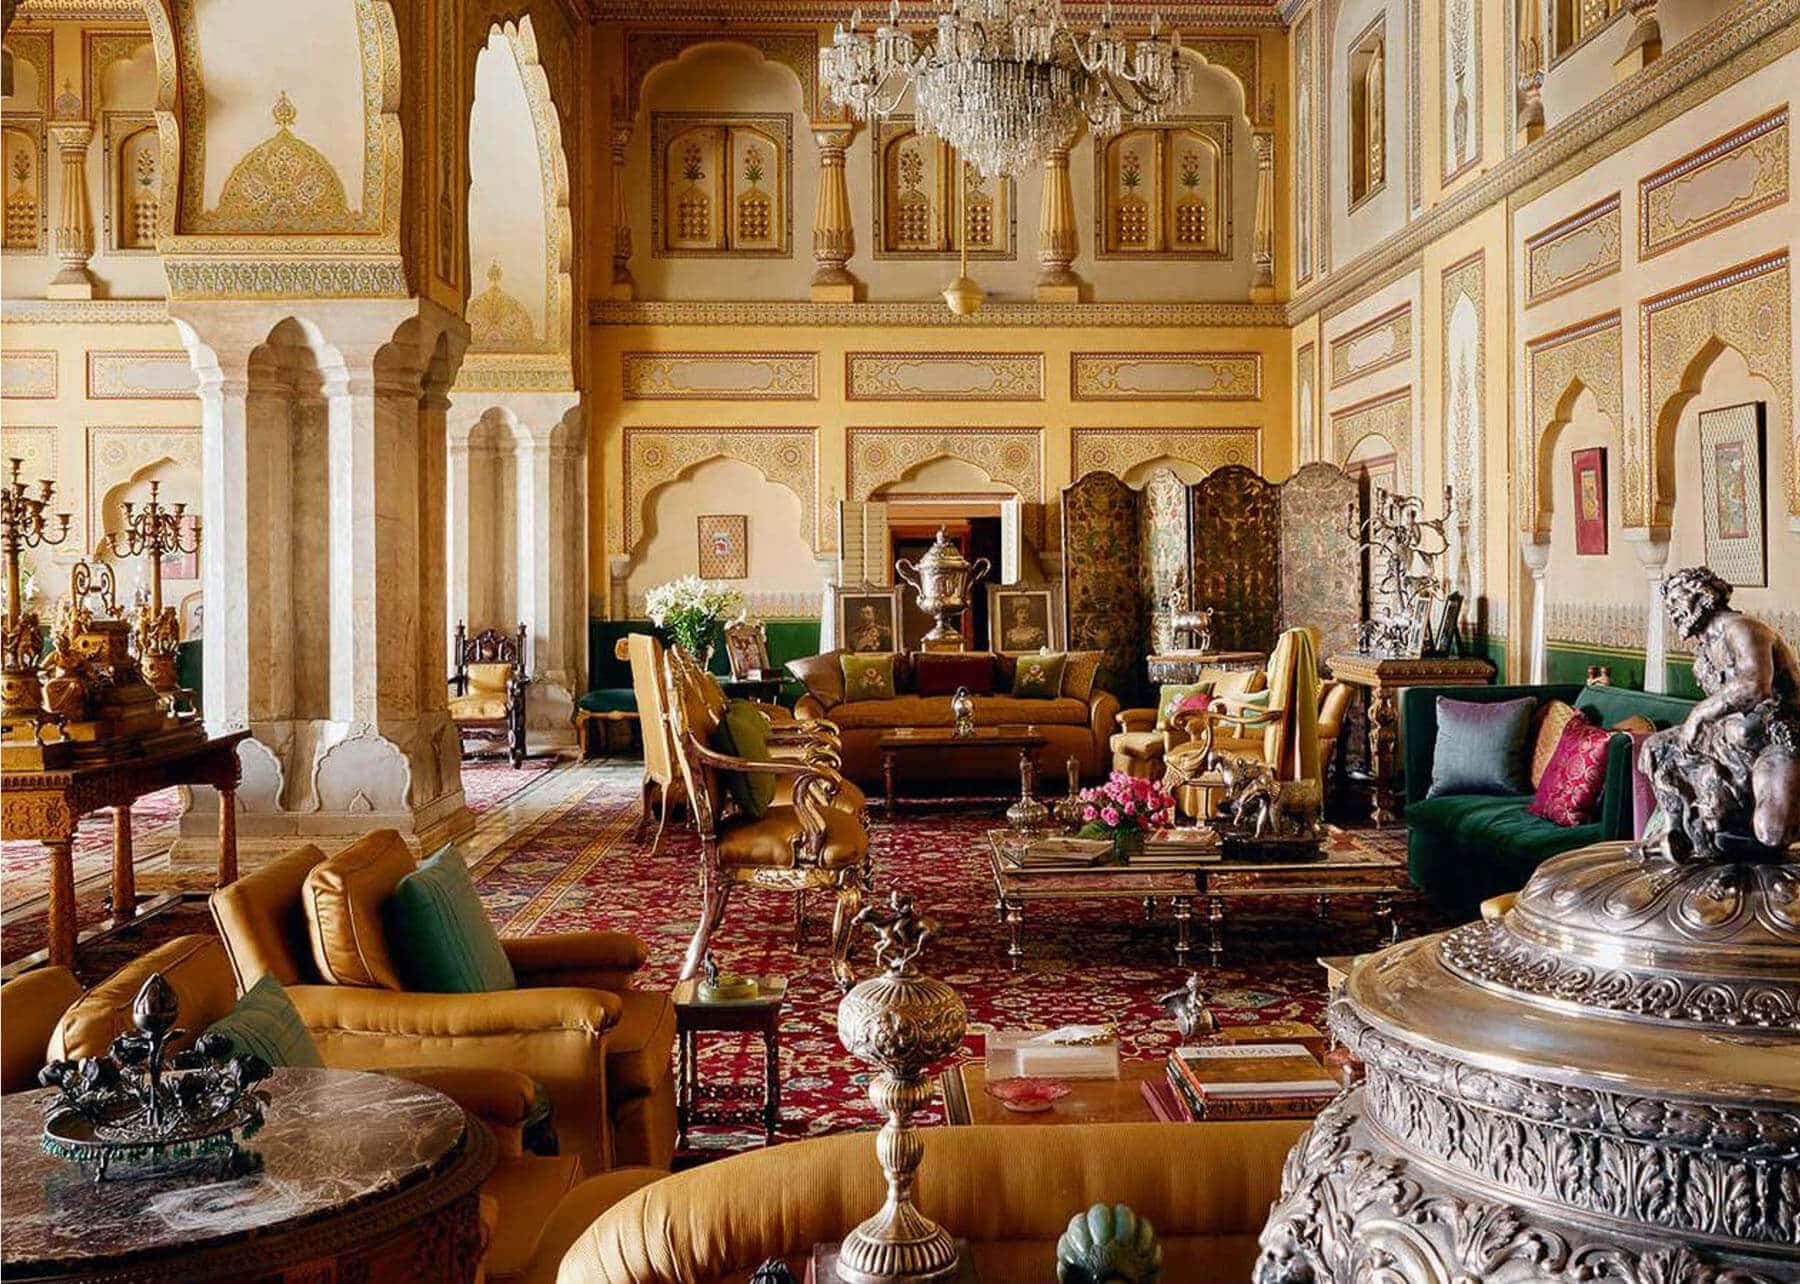 The story of living like a Maharaja amidst the royal grandeur